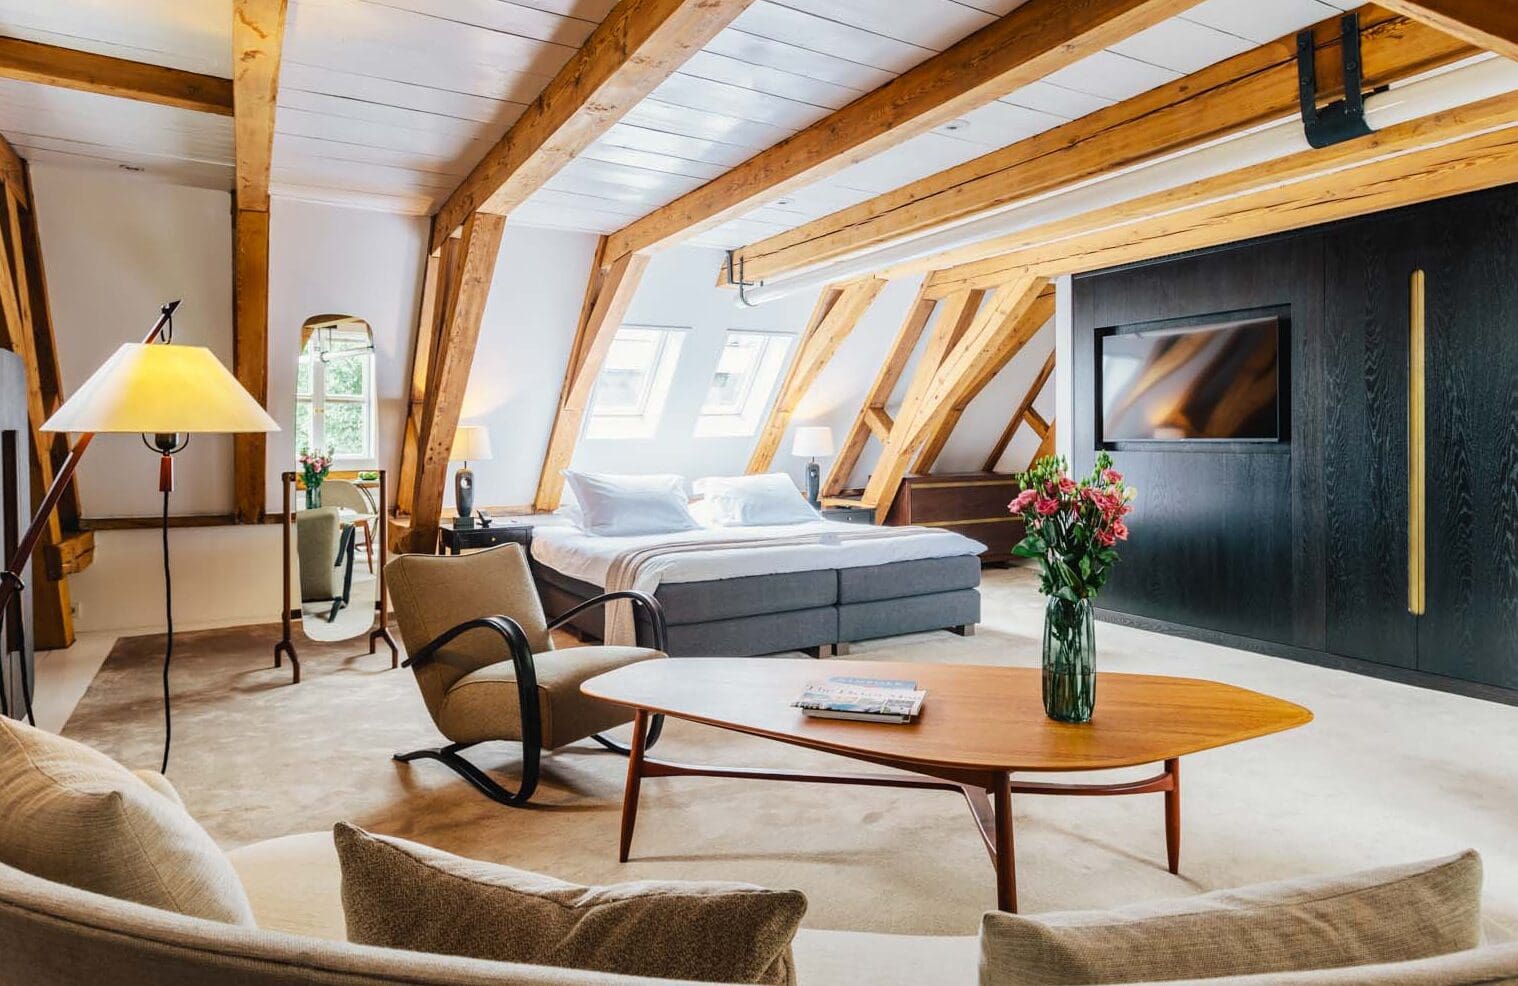 Bedroom in a loft style suite at luxury boutique hotel The Dylan Amsterdam, member of The Leading Hotels of The World. Modern furniture, design elements, historic exposed beams and a flagpole give an authentic décor to this suite.